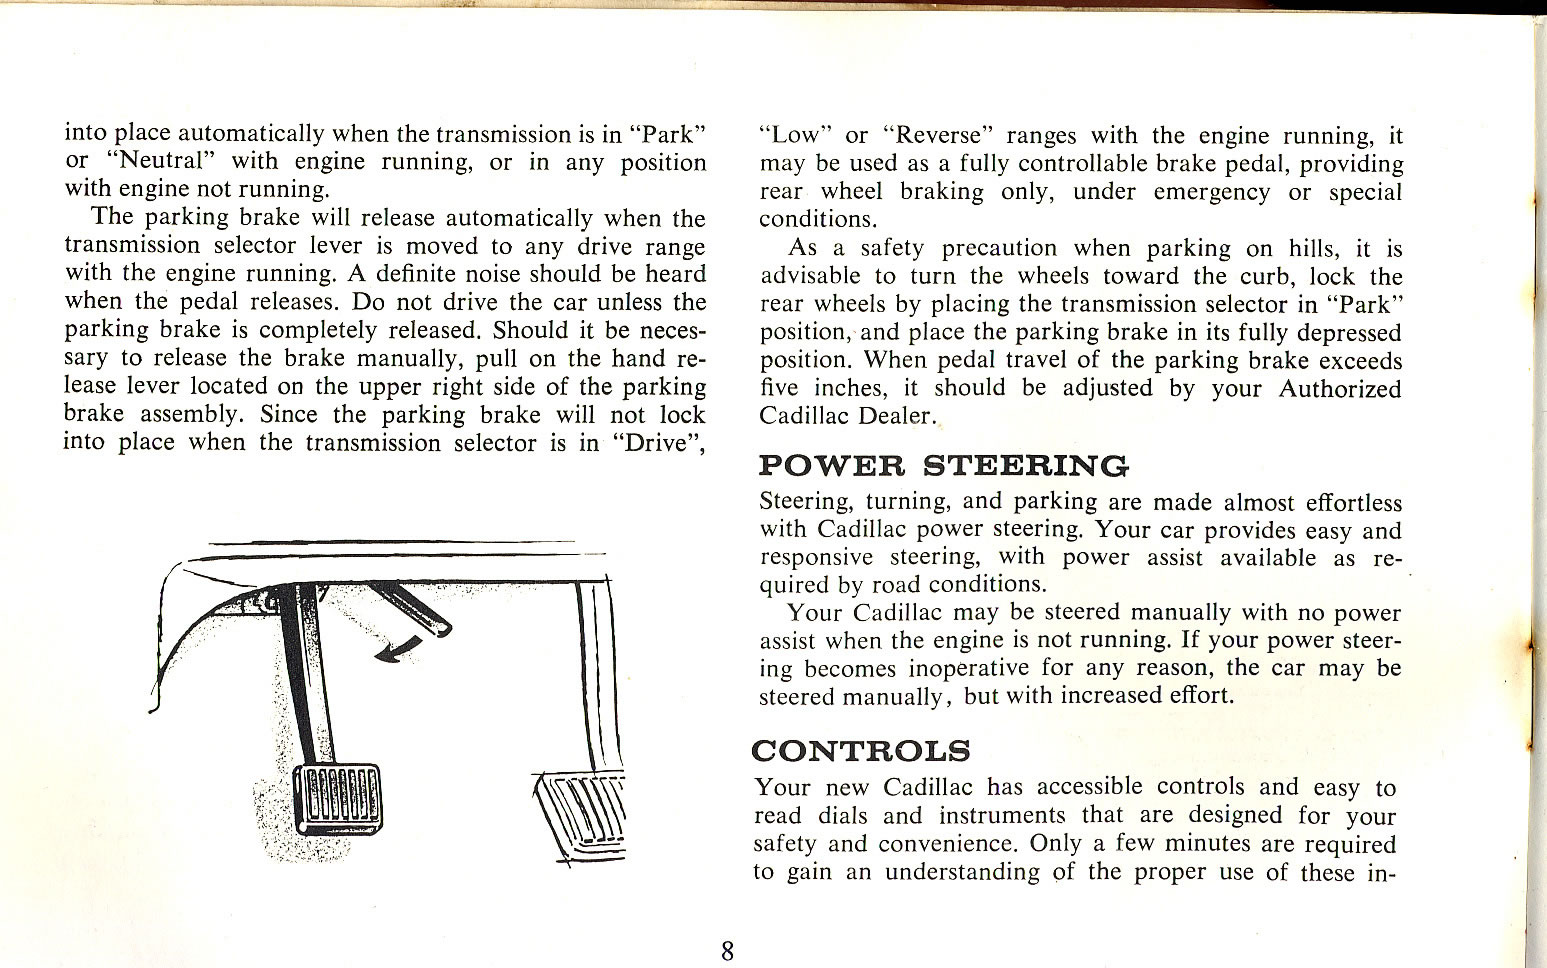 1965 Cadillac Owners Manual Page 29